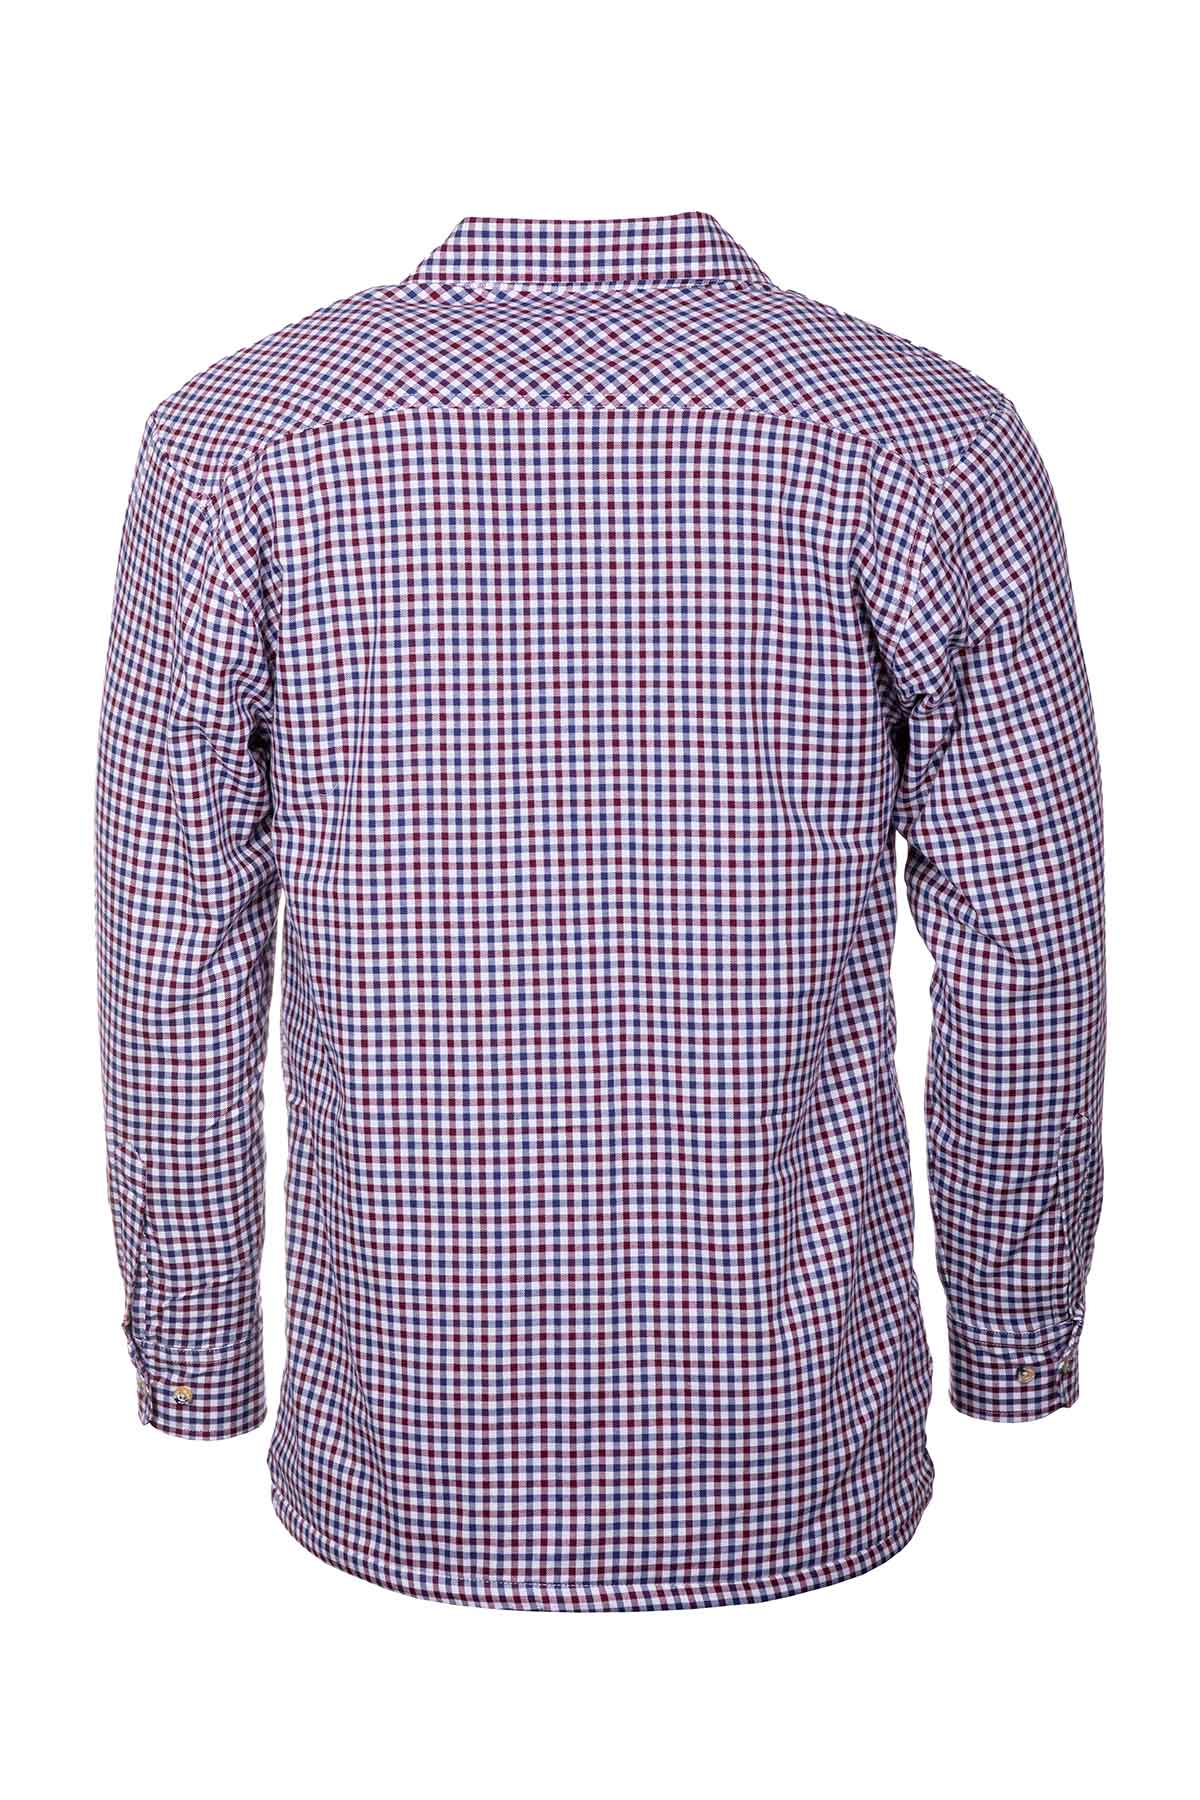 Mens Fleece Lined Shirt UK | Country Checked Shirts | Rydale